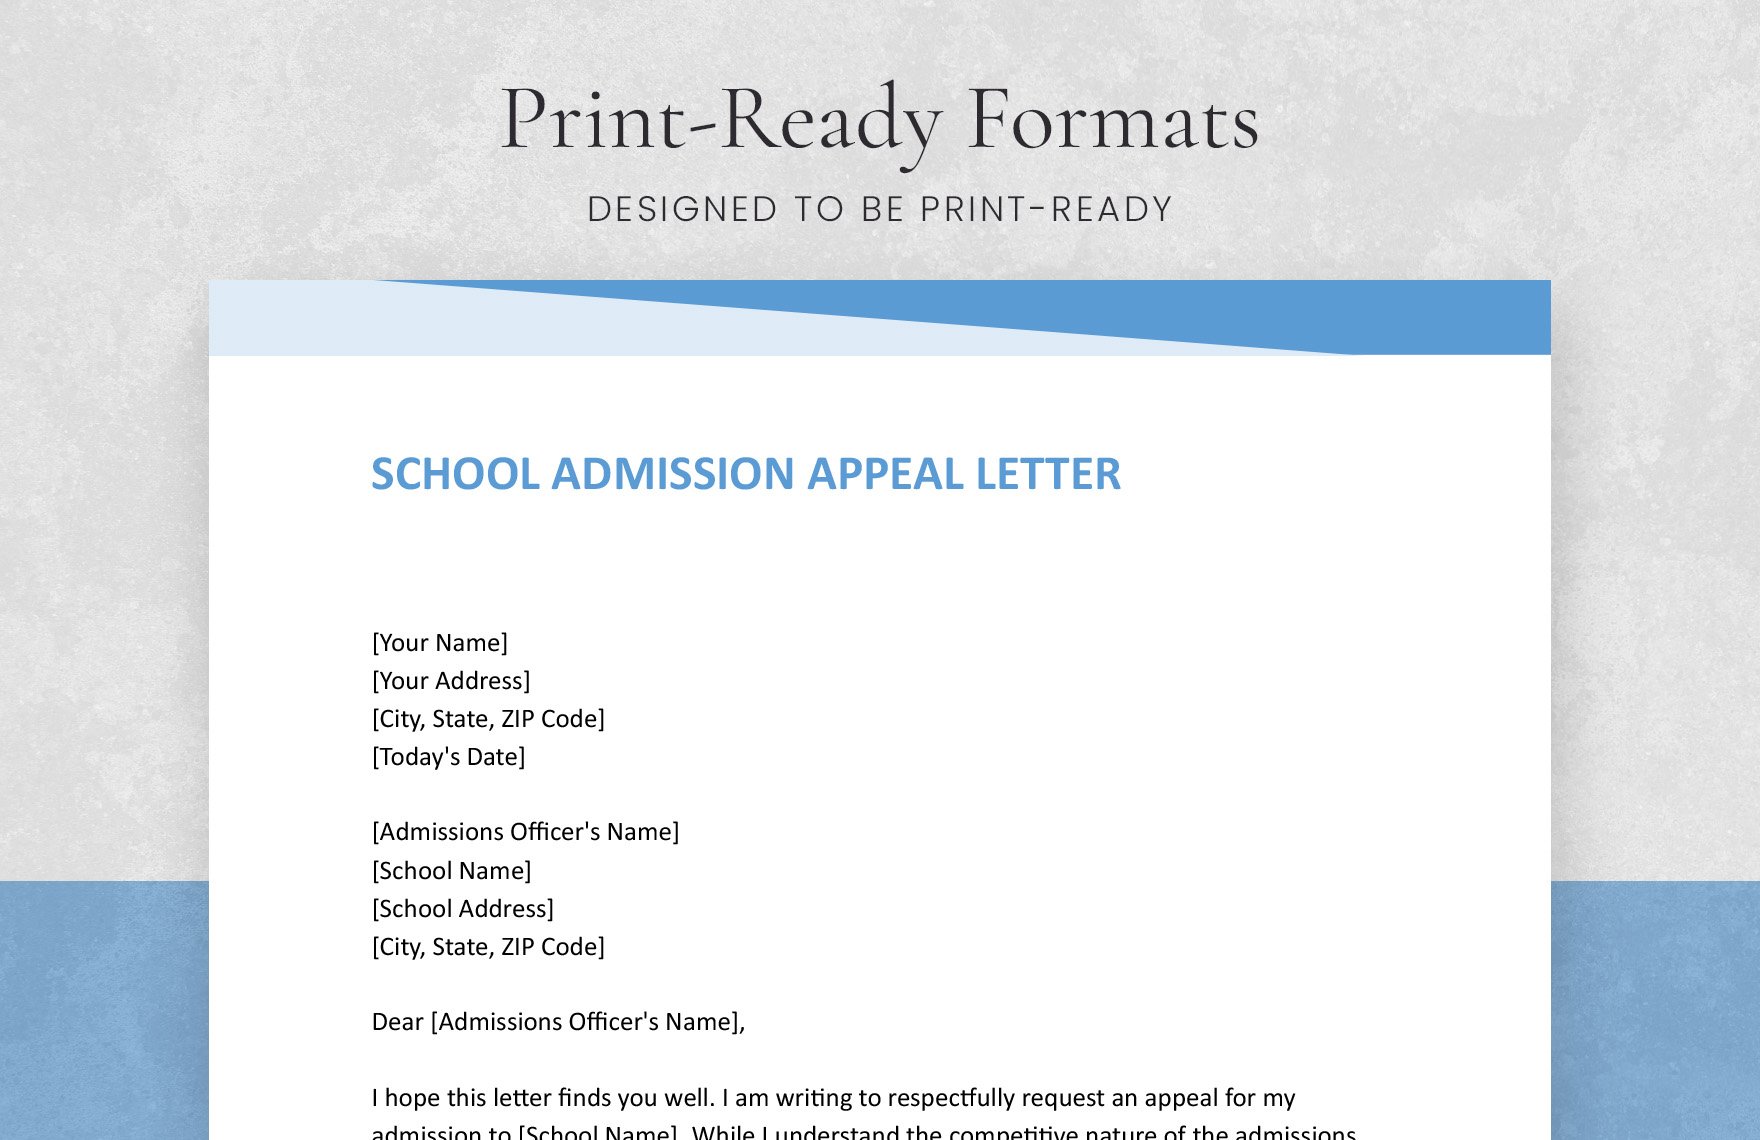 School Admission Appeal Letter